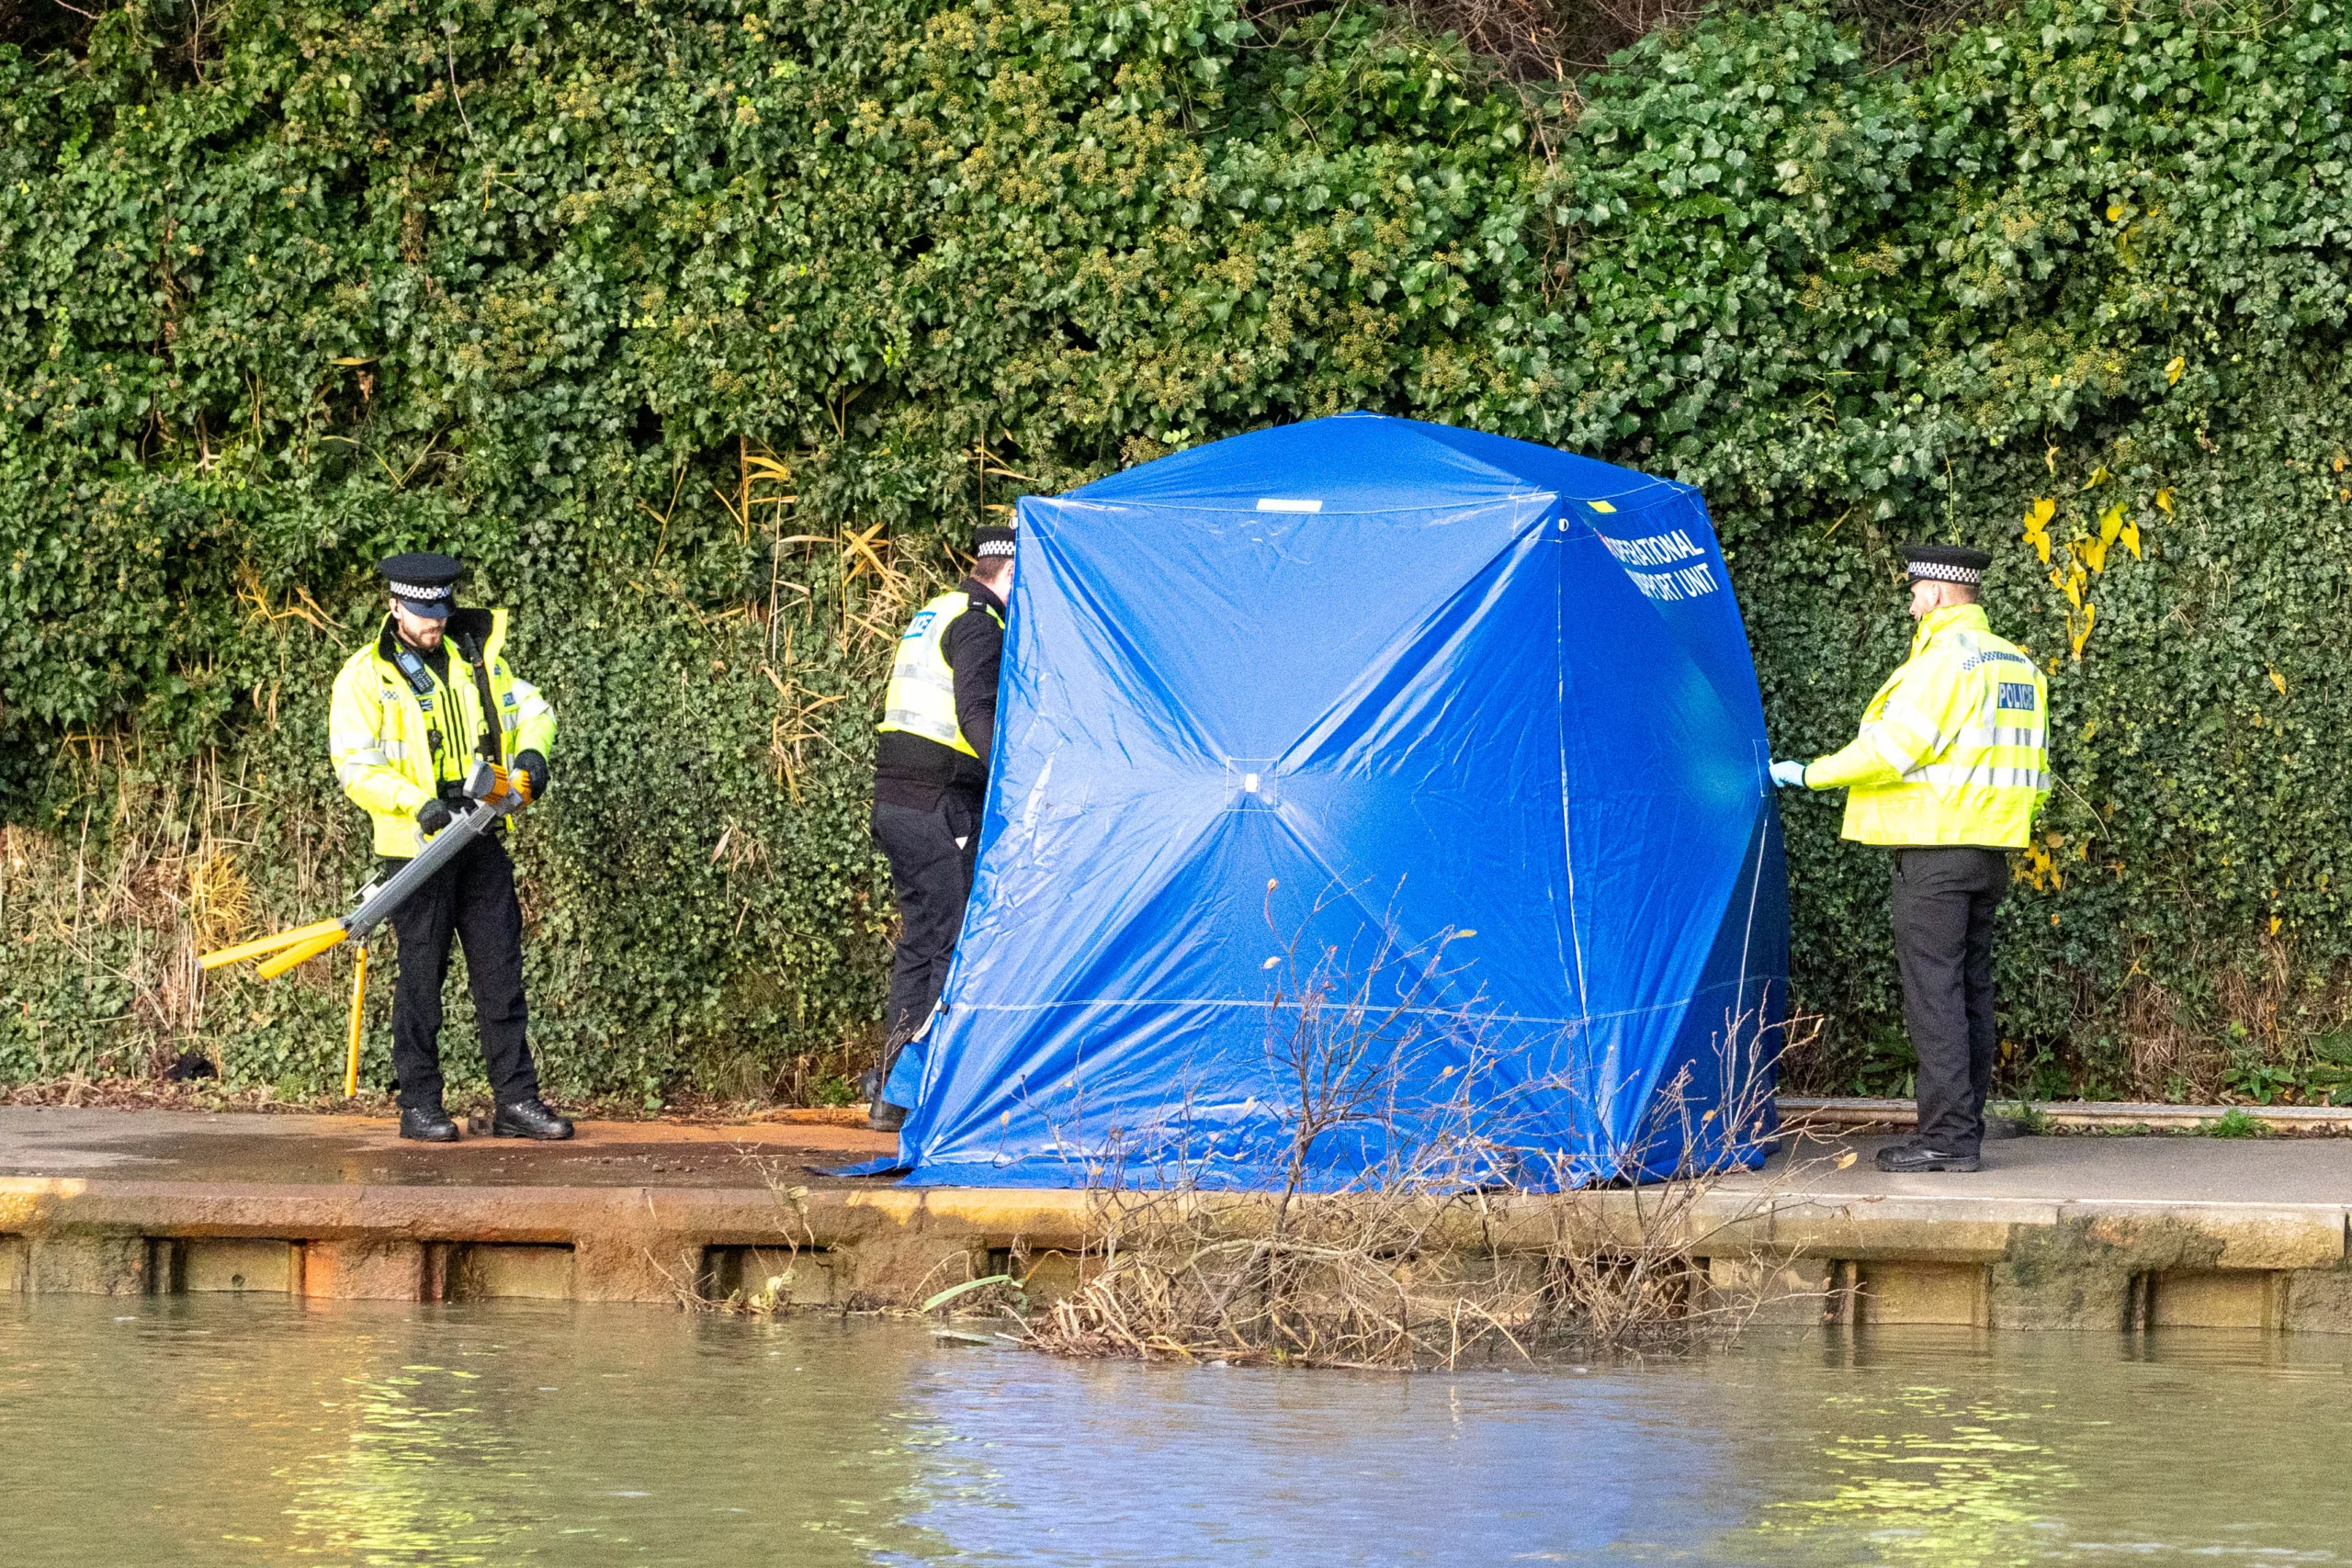 A body has been recovered from the River Nene, Peterborough. Police are investigating. PHOTO: Terry Harris